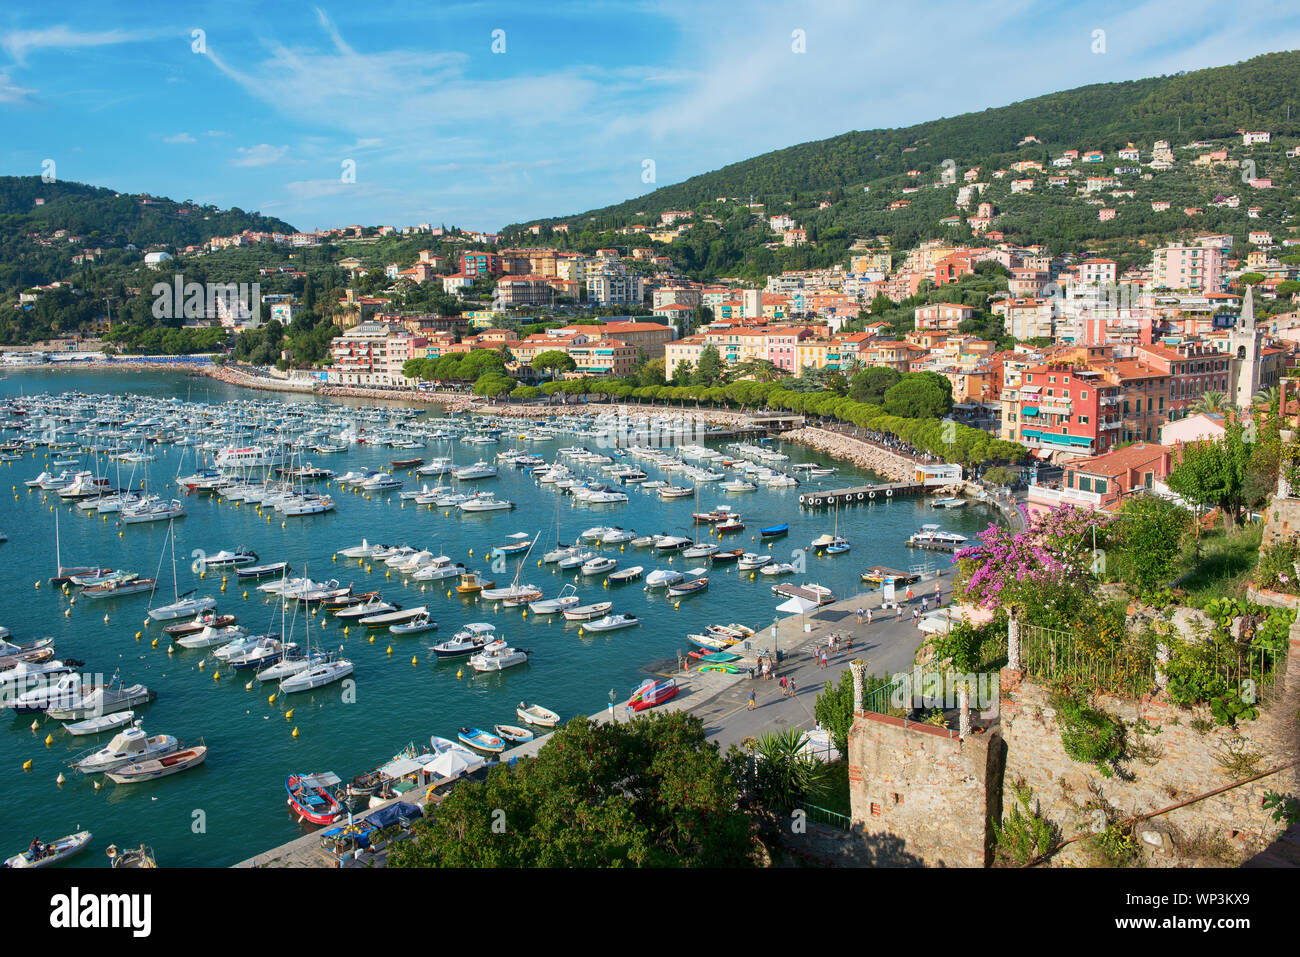 Elevated view of the bay and Lerici in the Gulf of Spezia, Northern Italy from the castle showing the boats moored in the marina and historic architec Stock Photo